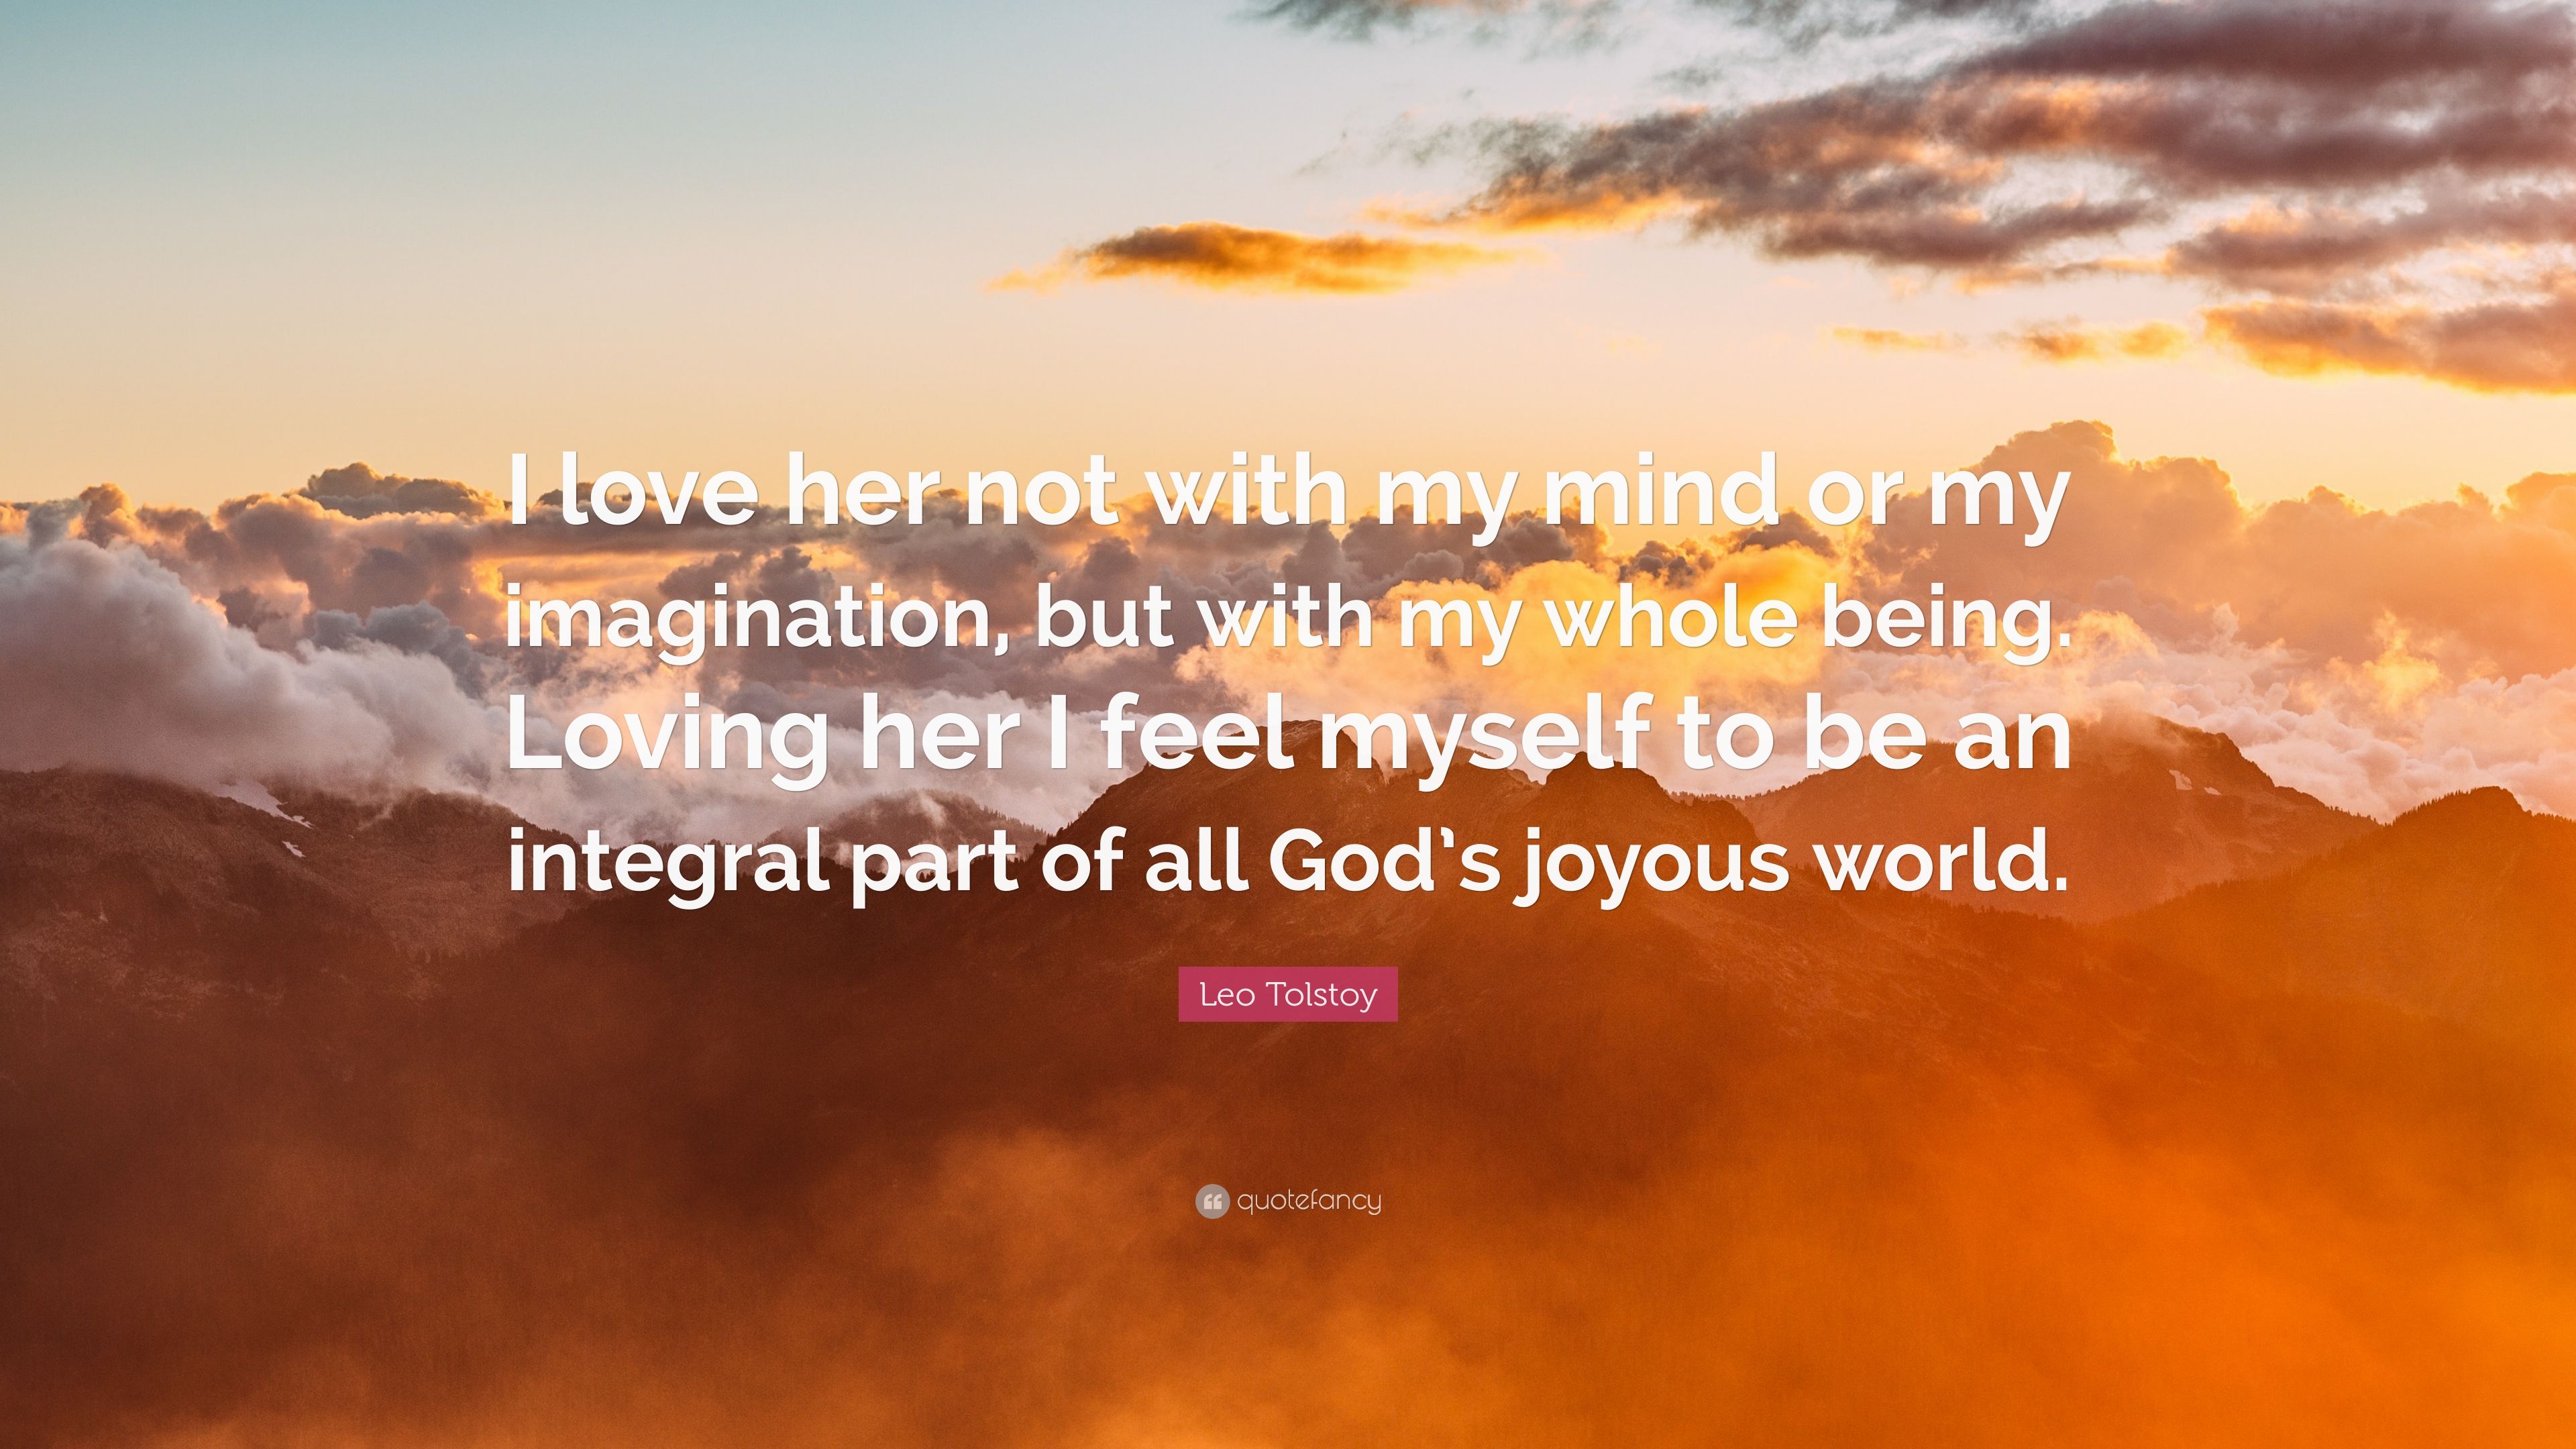 Leo Tolstoy Quote: “I love her not with my mind or my imagination, but with my whole being. Loving her I feel myself to be an integral part .” (10 wallpaper)